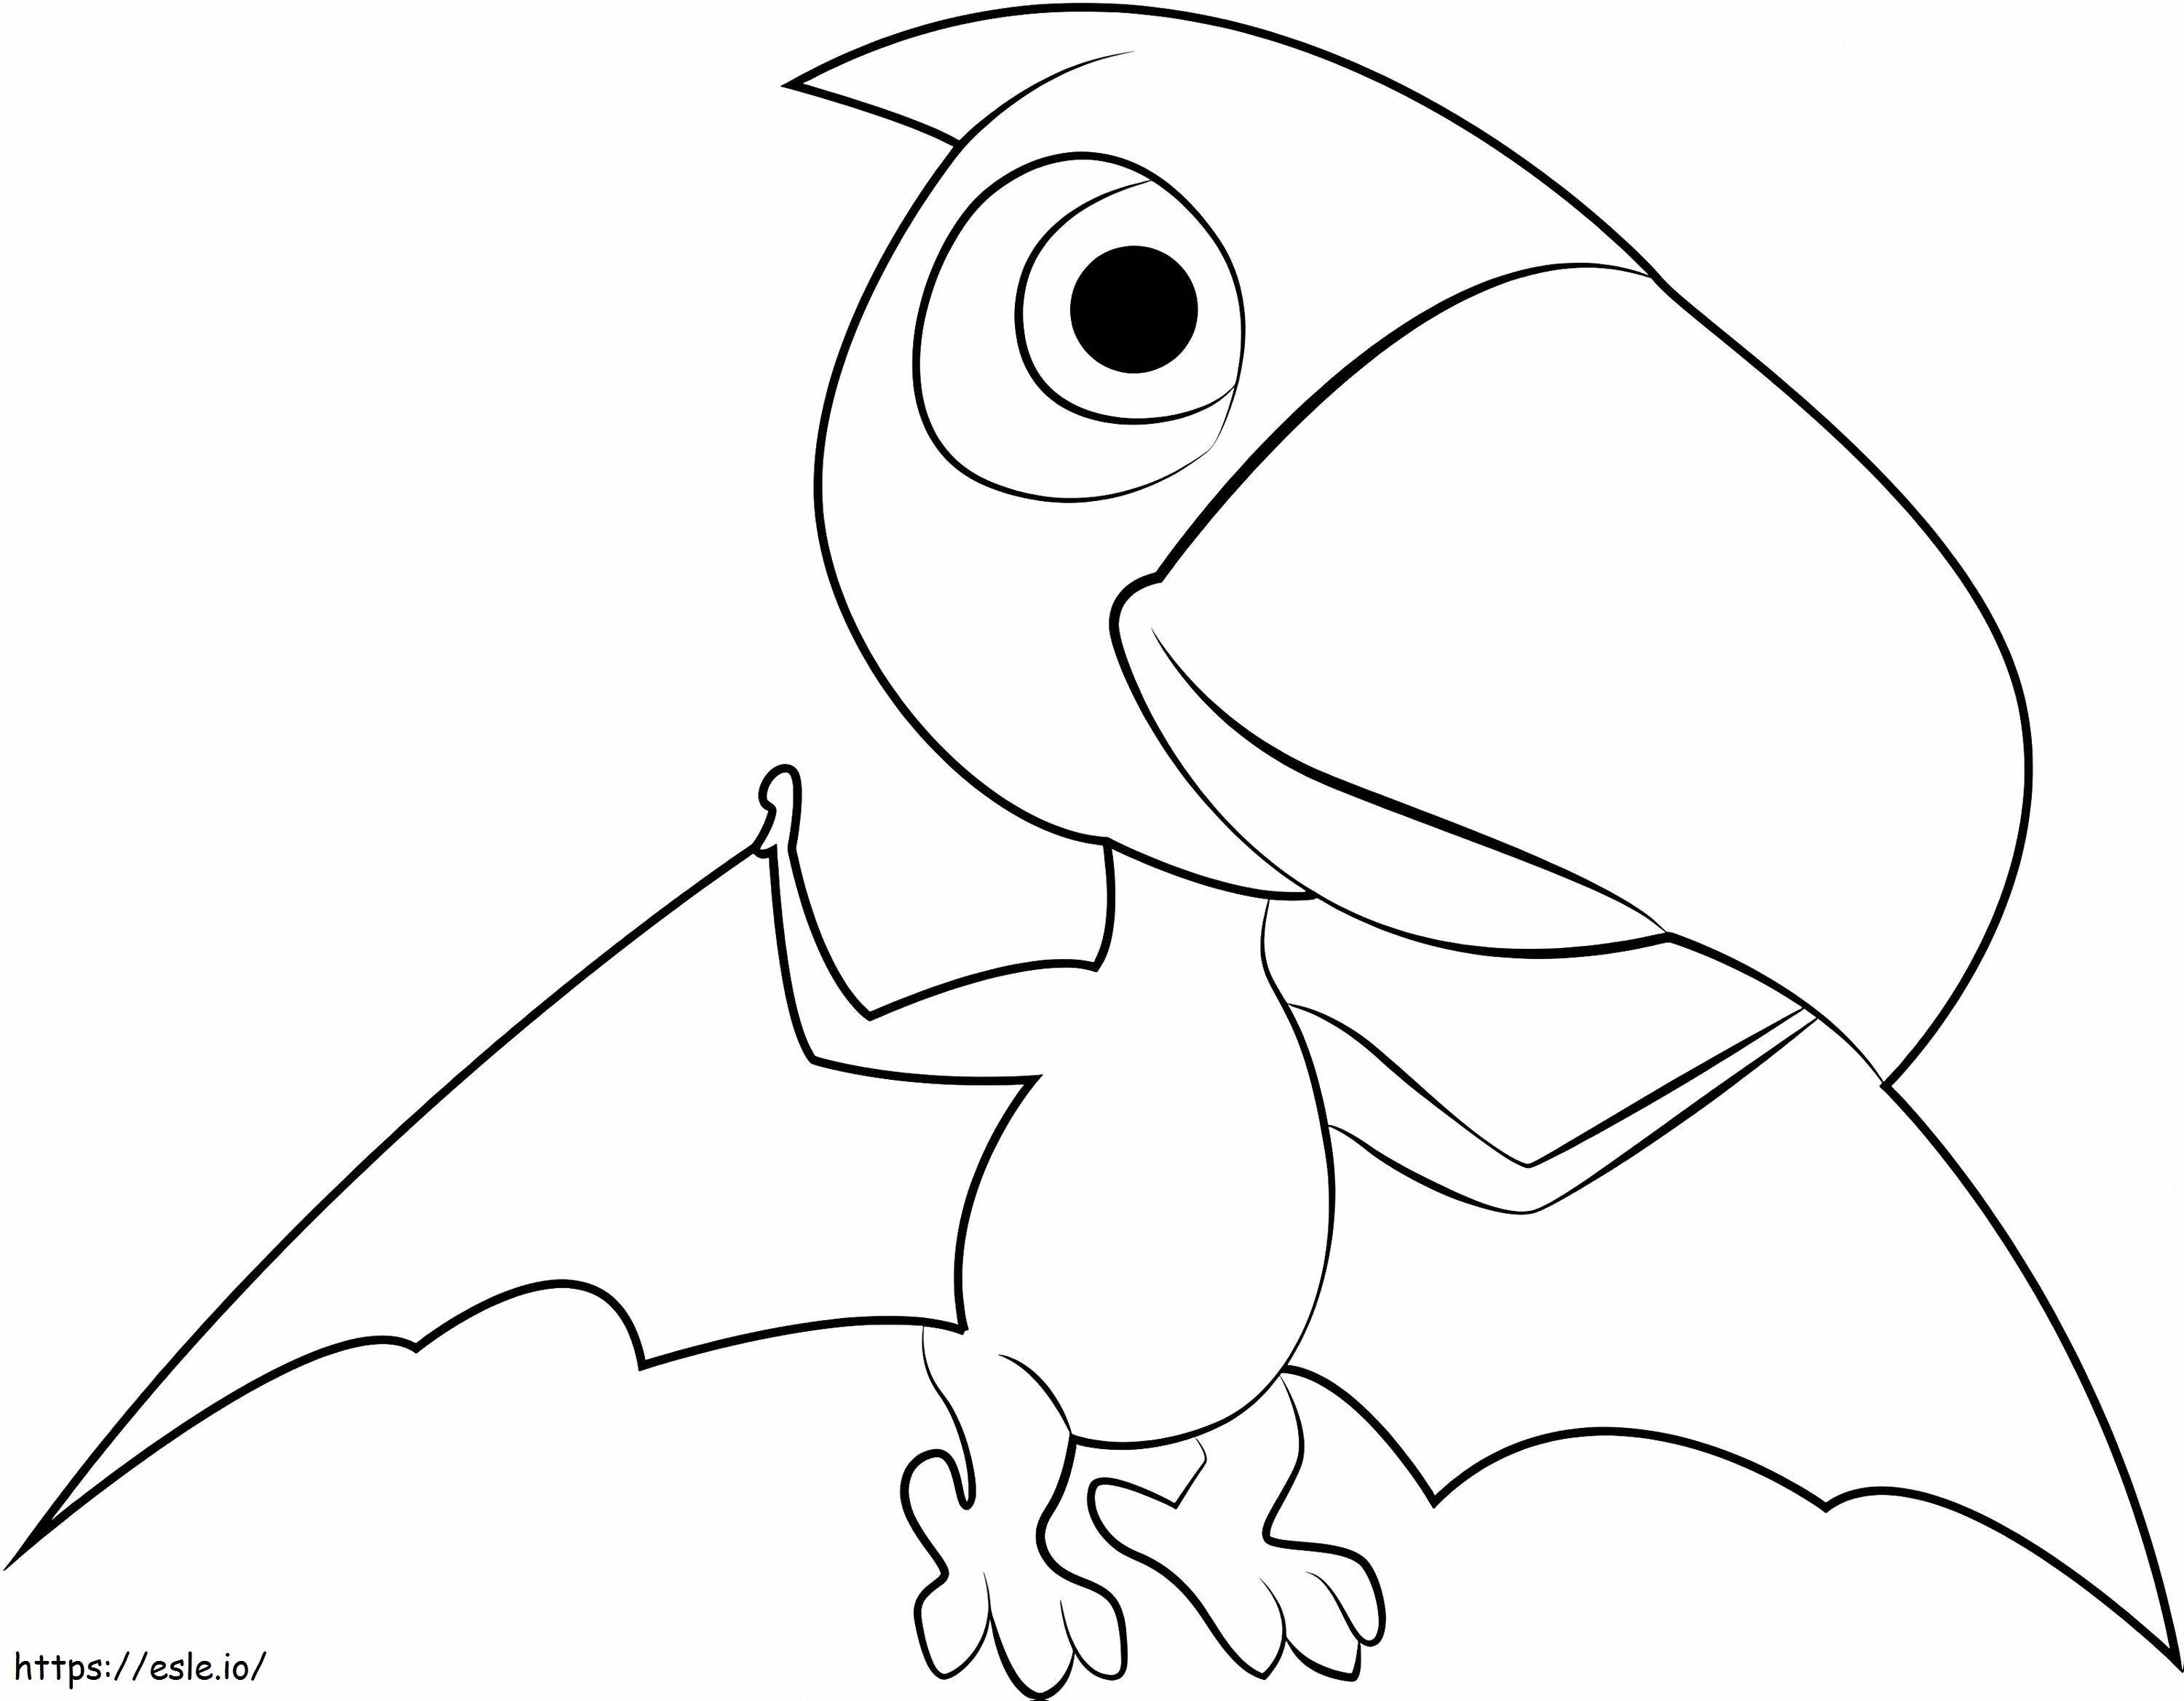 1530323326 Terry1 coloring page